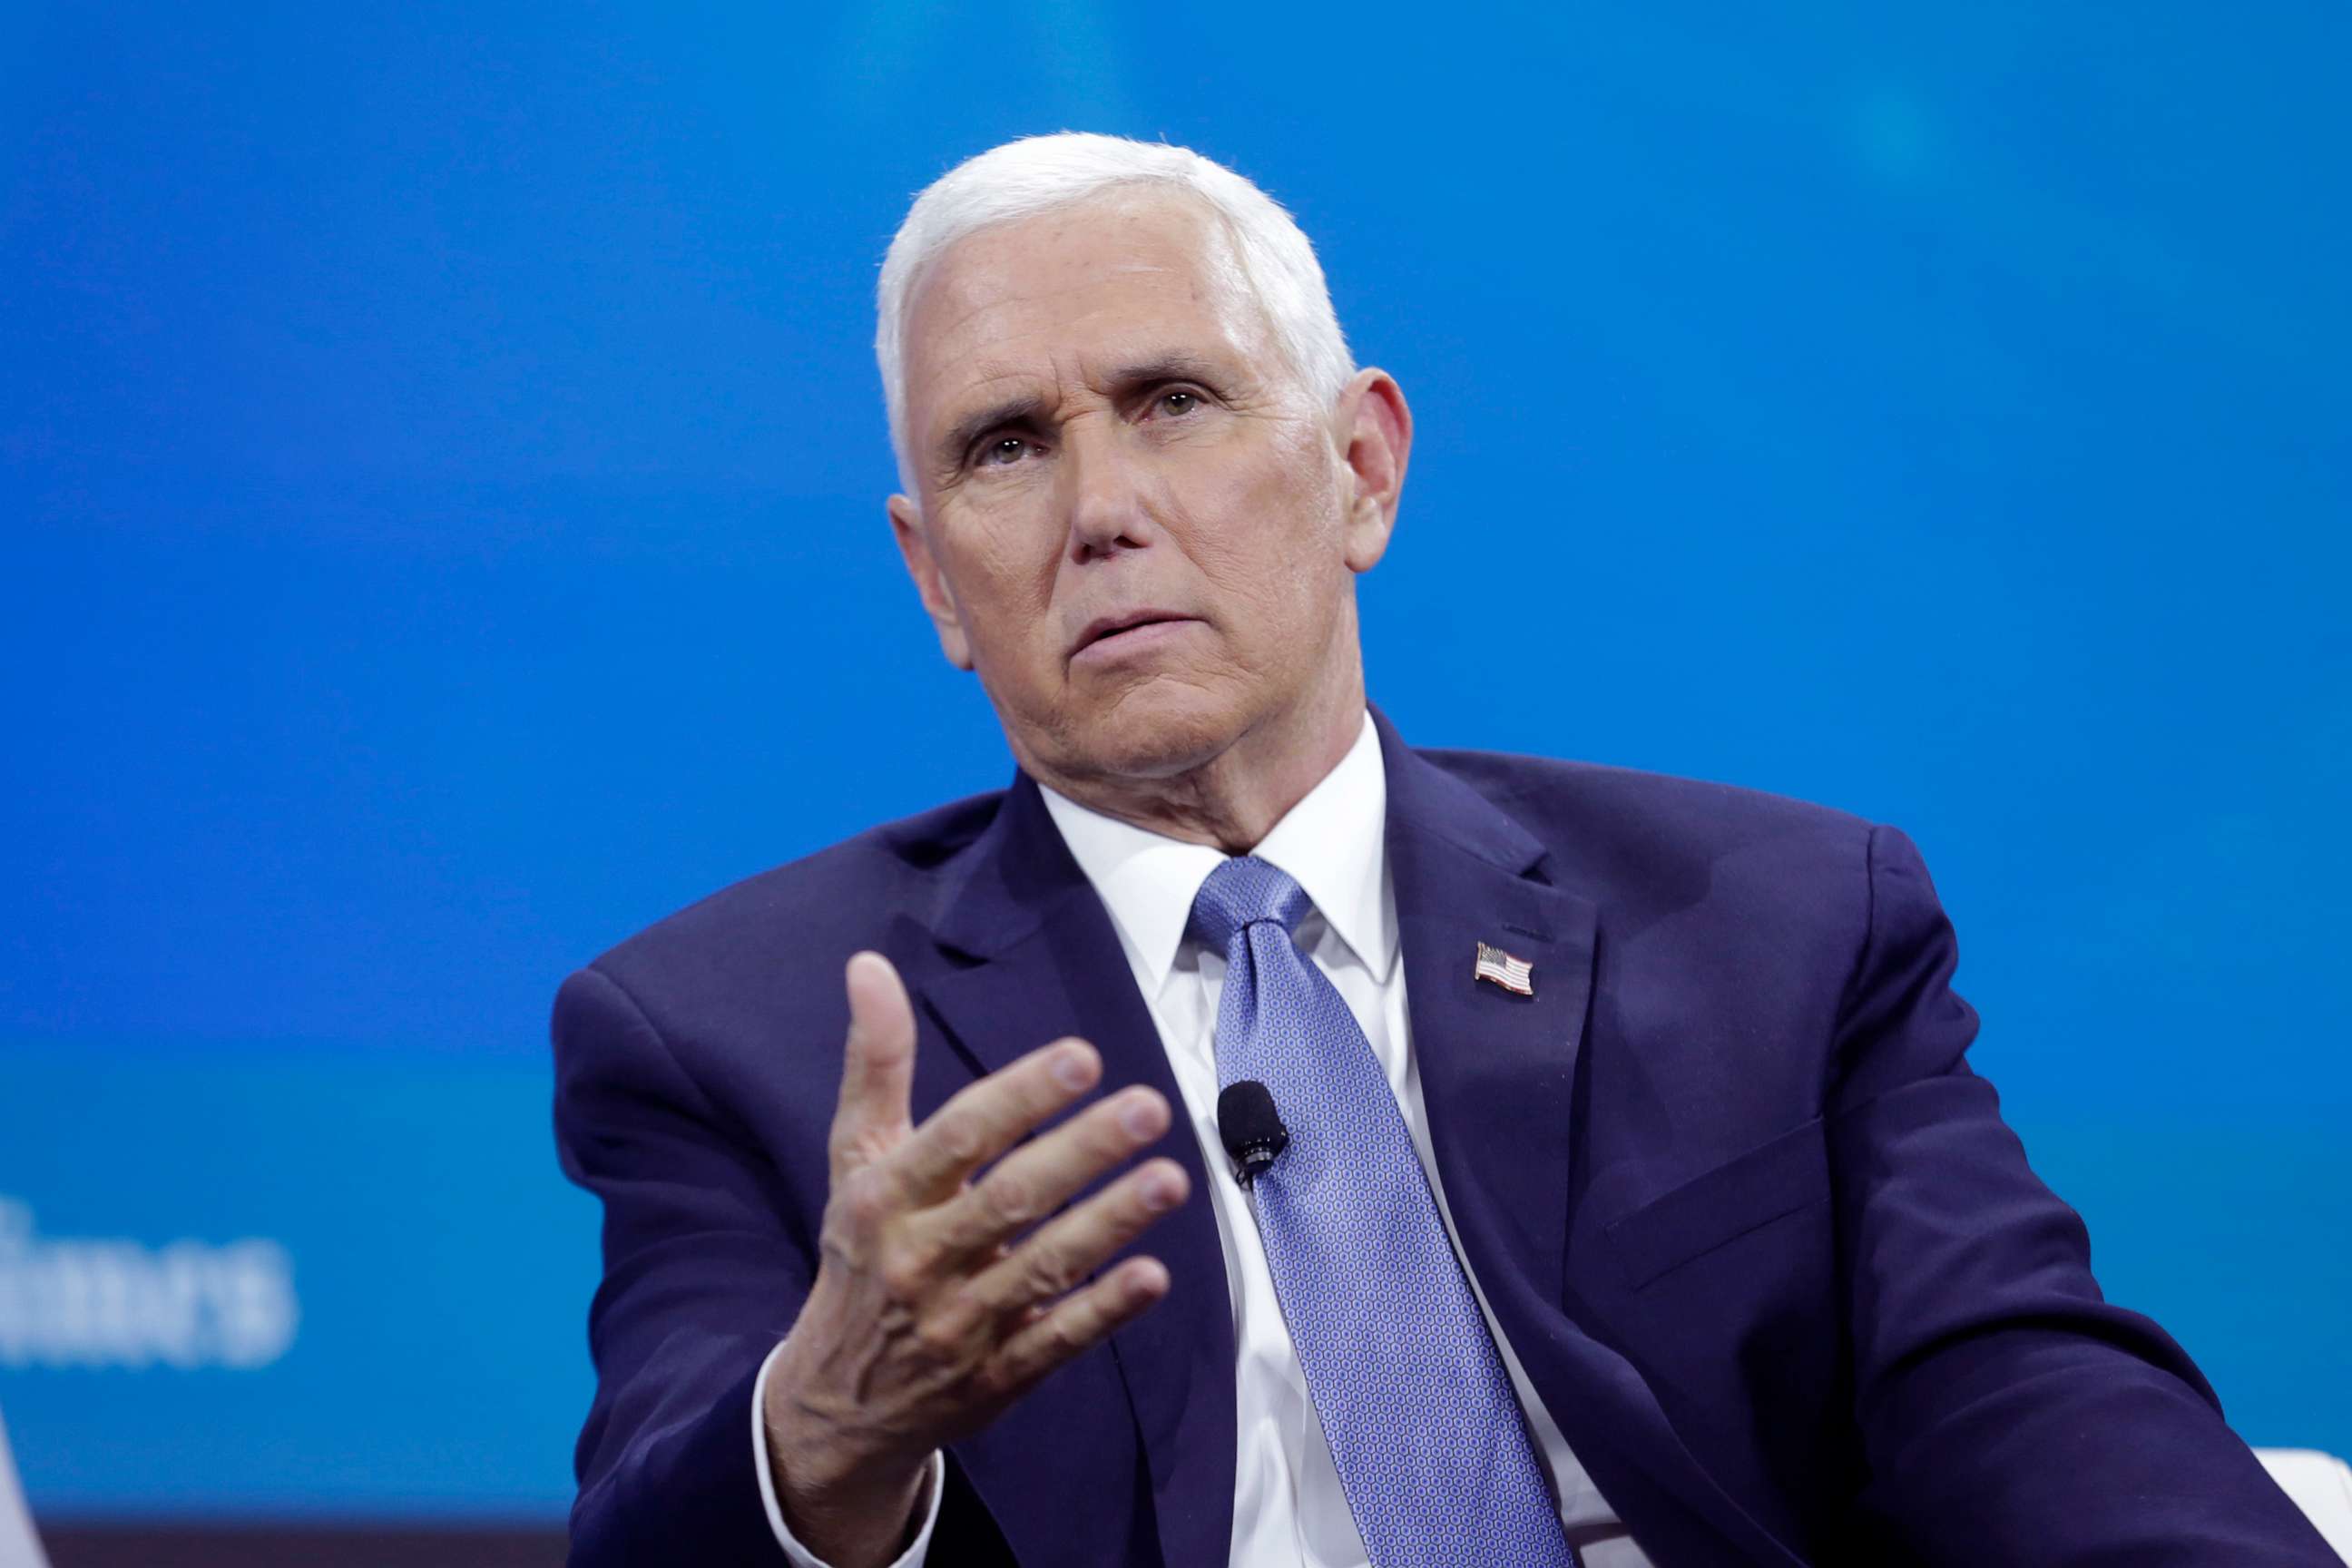 PHOTO: In this Nov. 30, 2022, file photo, Mike Pence speaks on stage at the 2022 New York Times DealBook in New York.